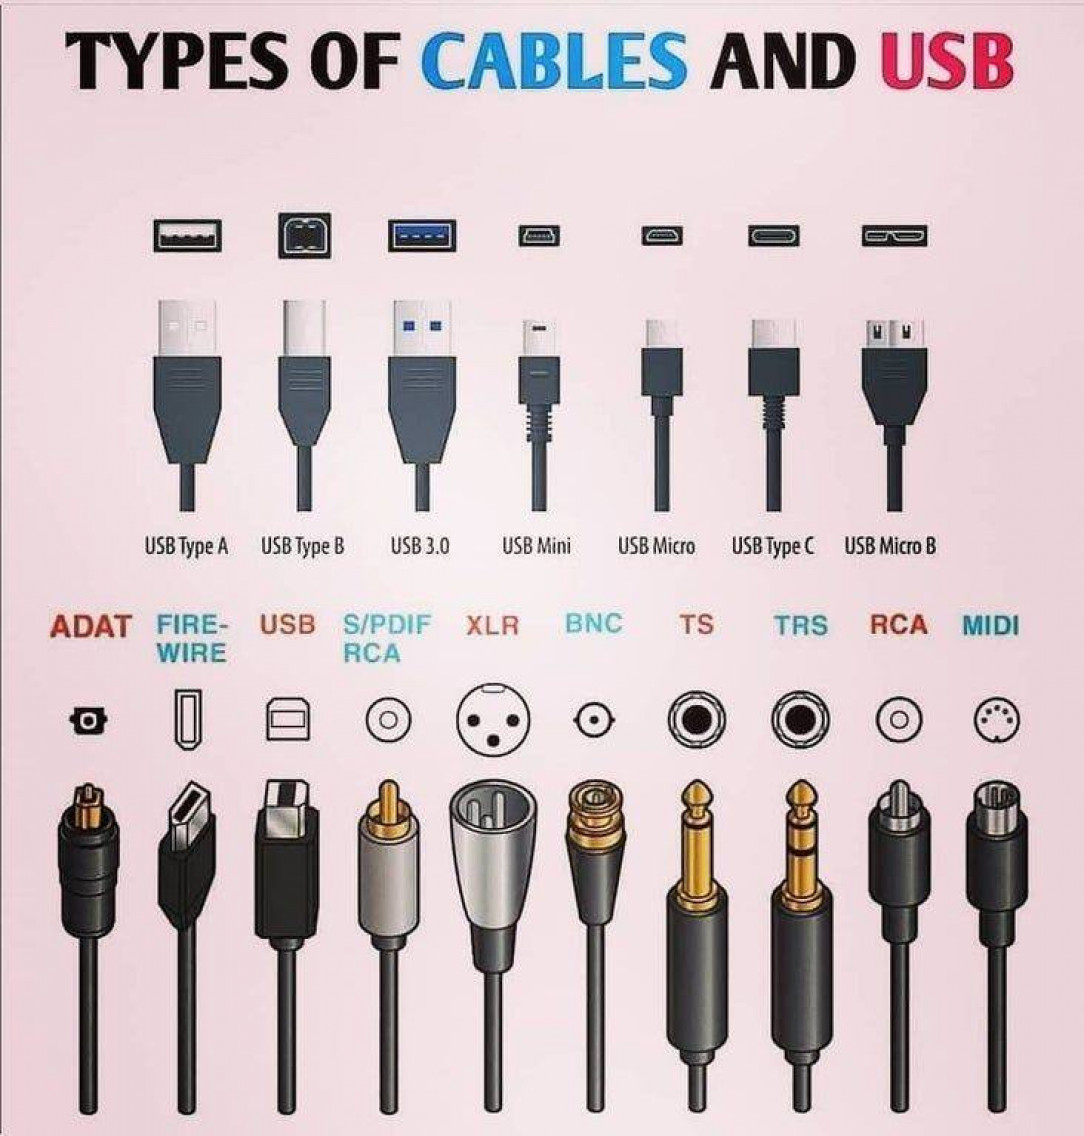 Types of cables and USB